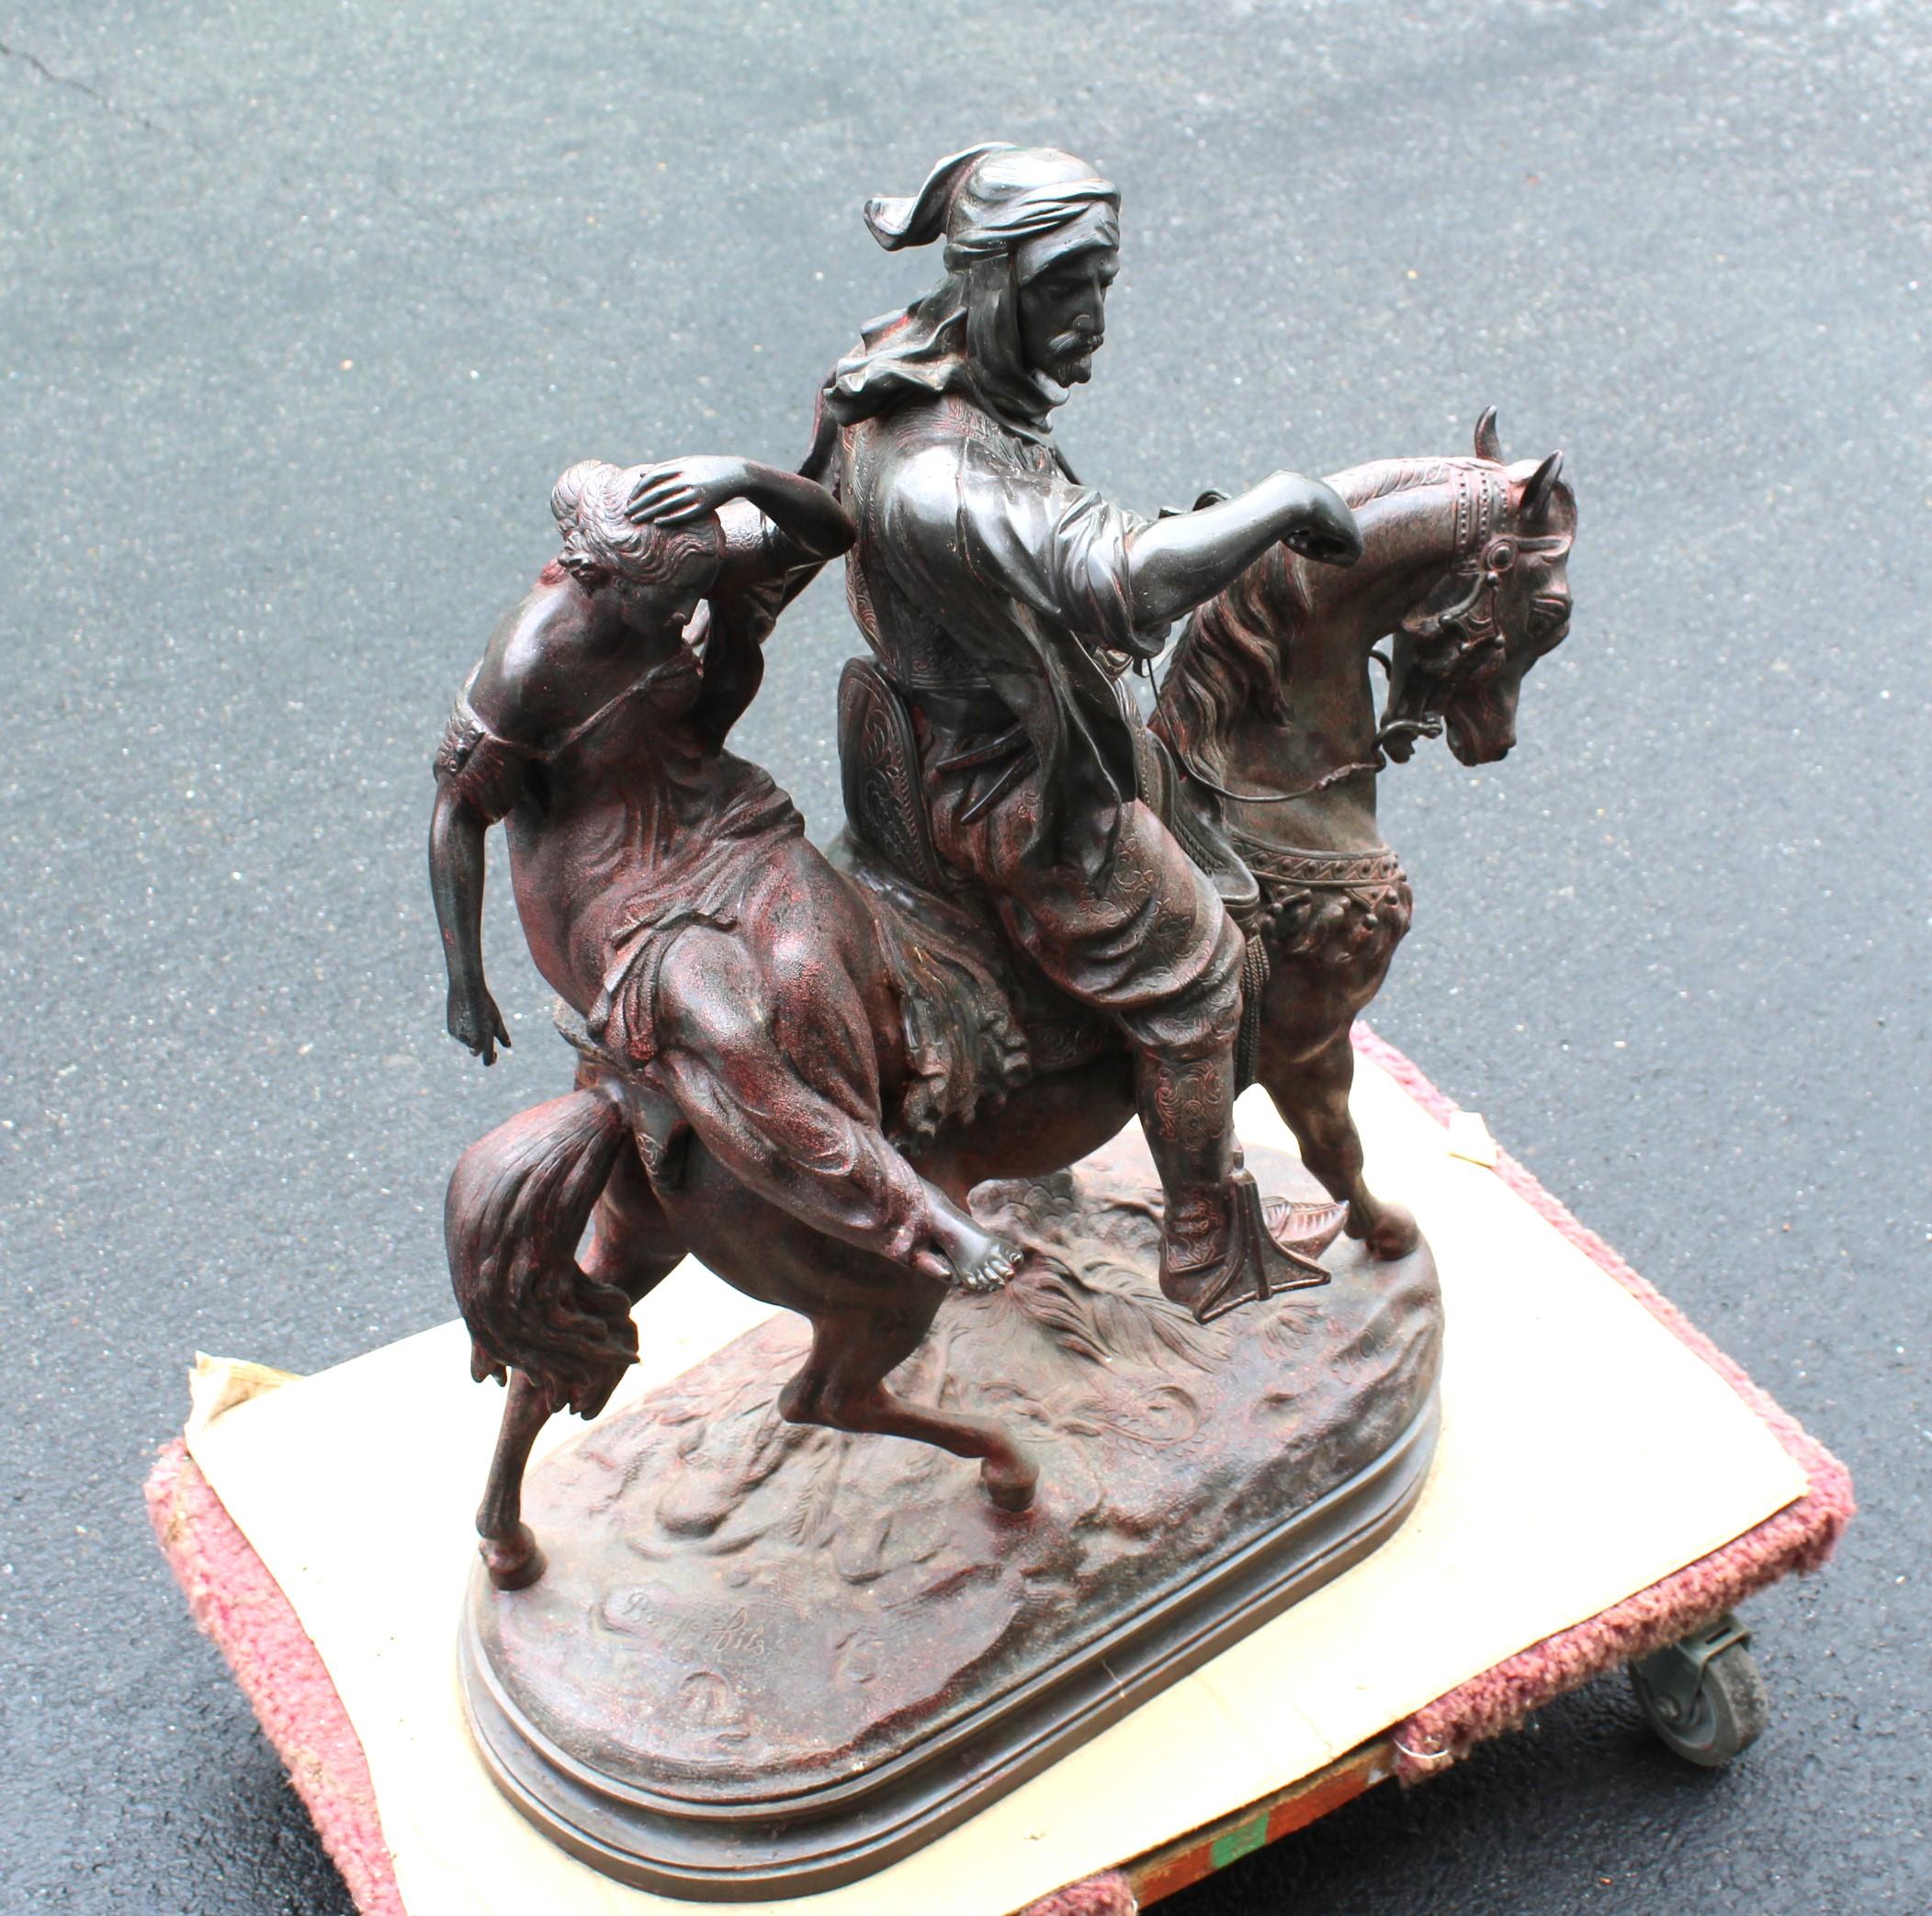 A large Sculpture by both Barye and El Guillman cast and made after the Original . Two signatures are visible on the base . Large at 33